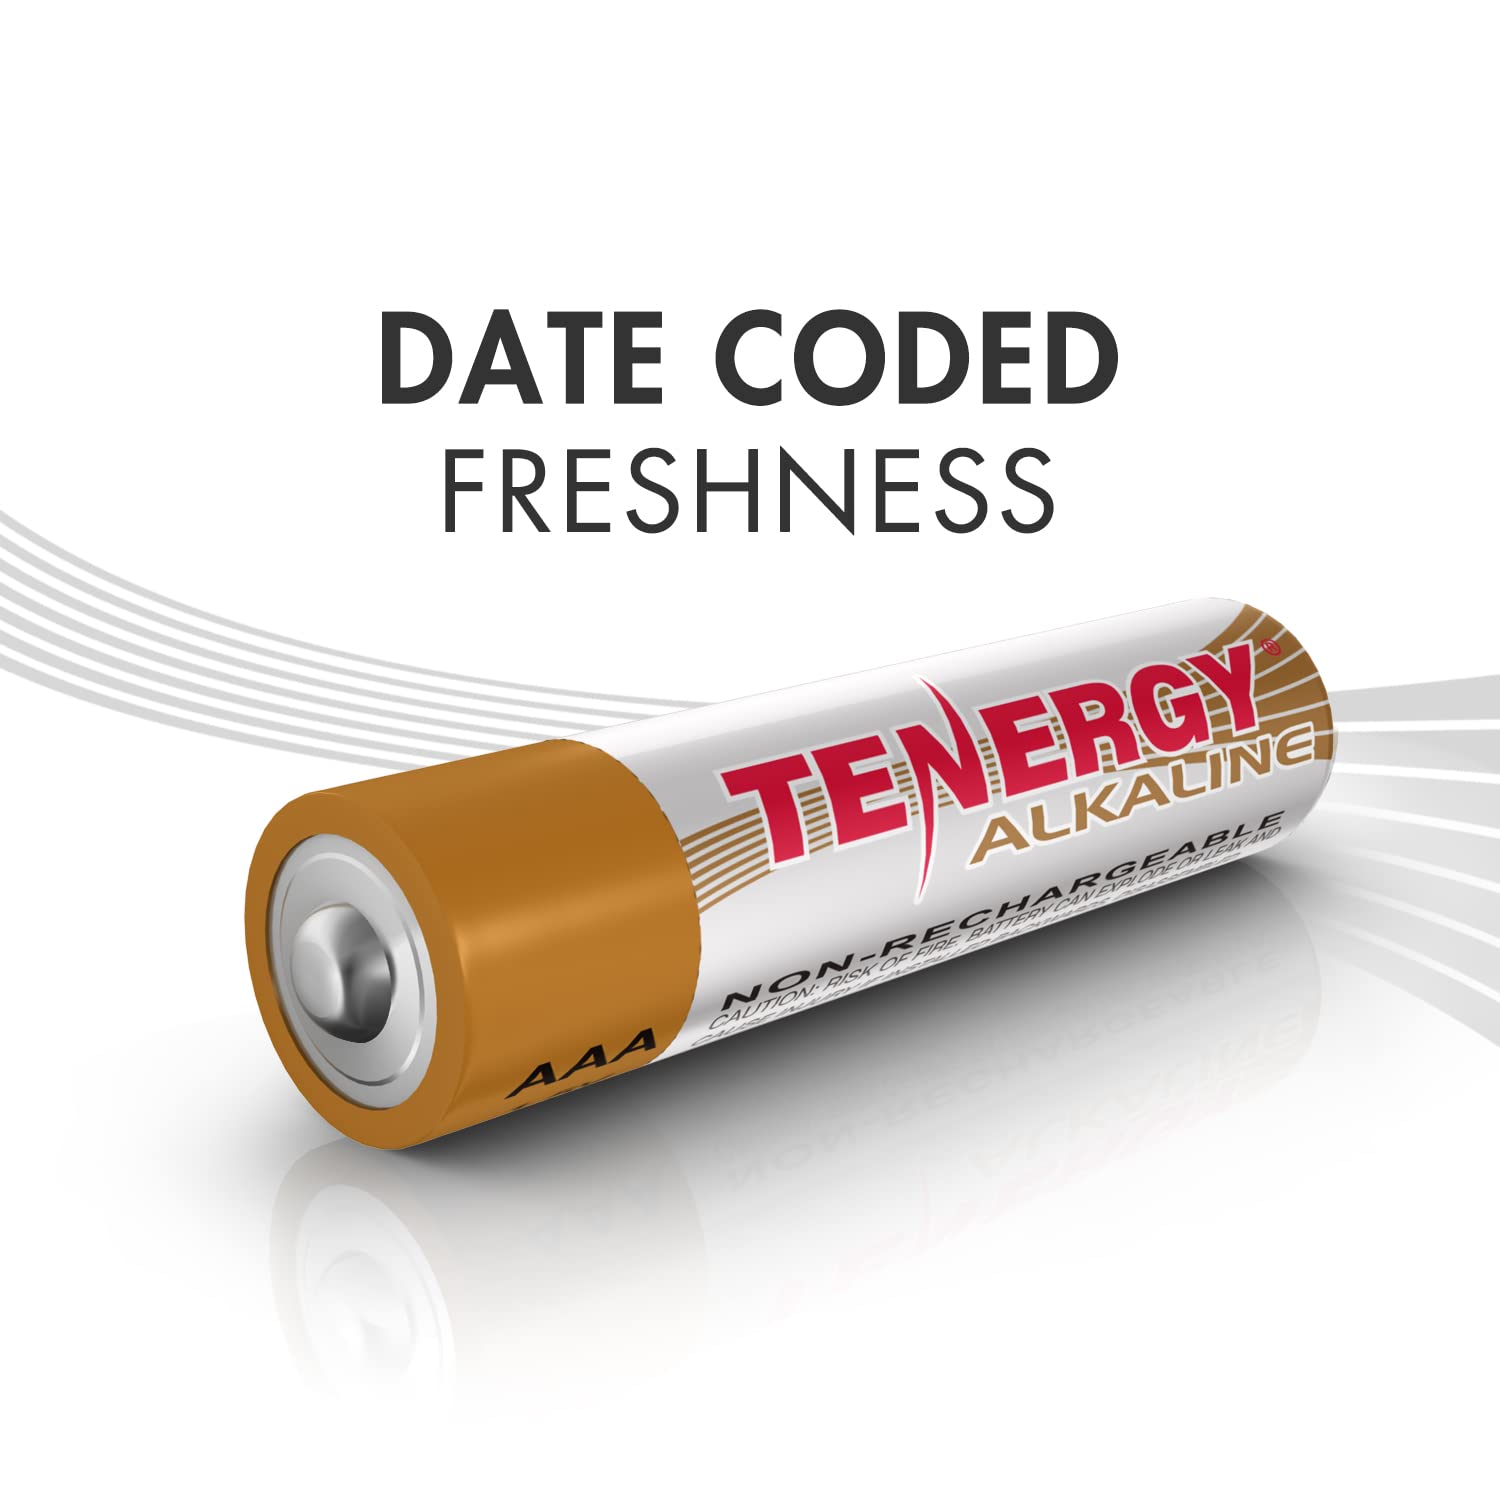 Tenergy 1.5V AAA Alkaline Battery, High Performance AAA Non-Rechargeable Batteries for Clocks, Remotes, Toys & Electronic Devices, Replacement AAA Cell Batteries, 720 Pack